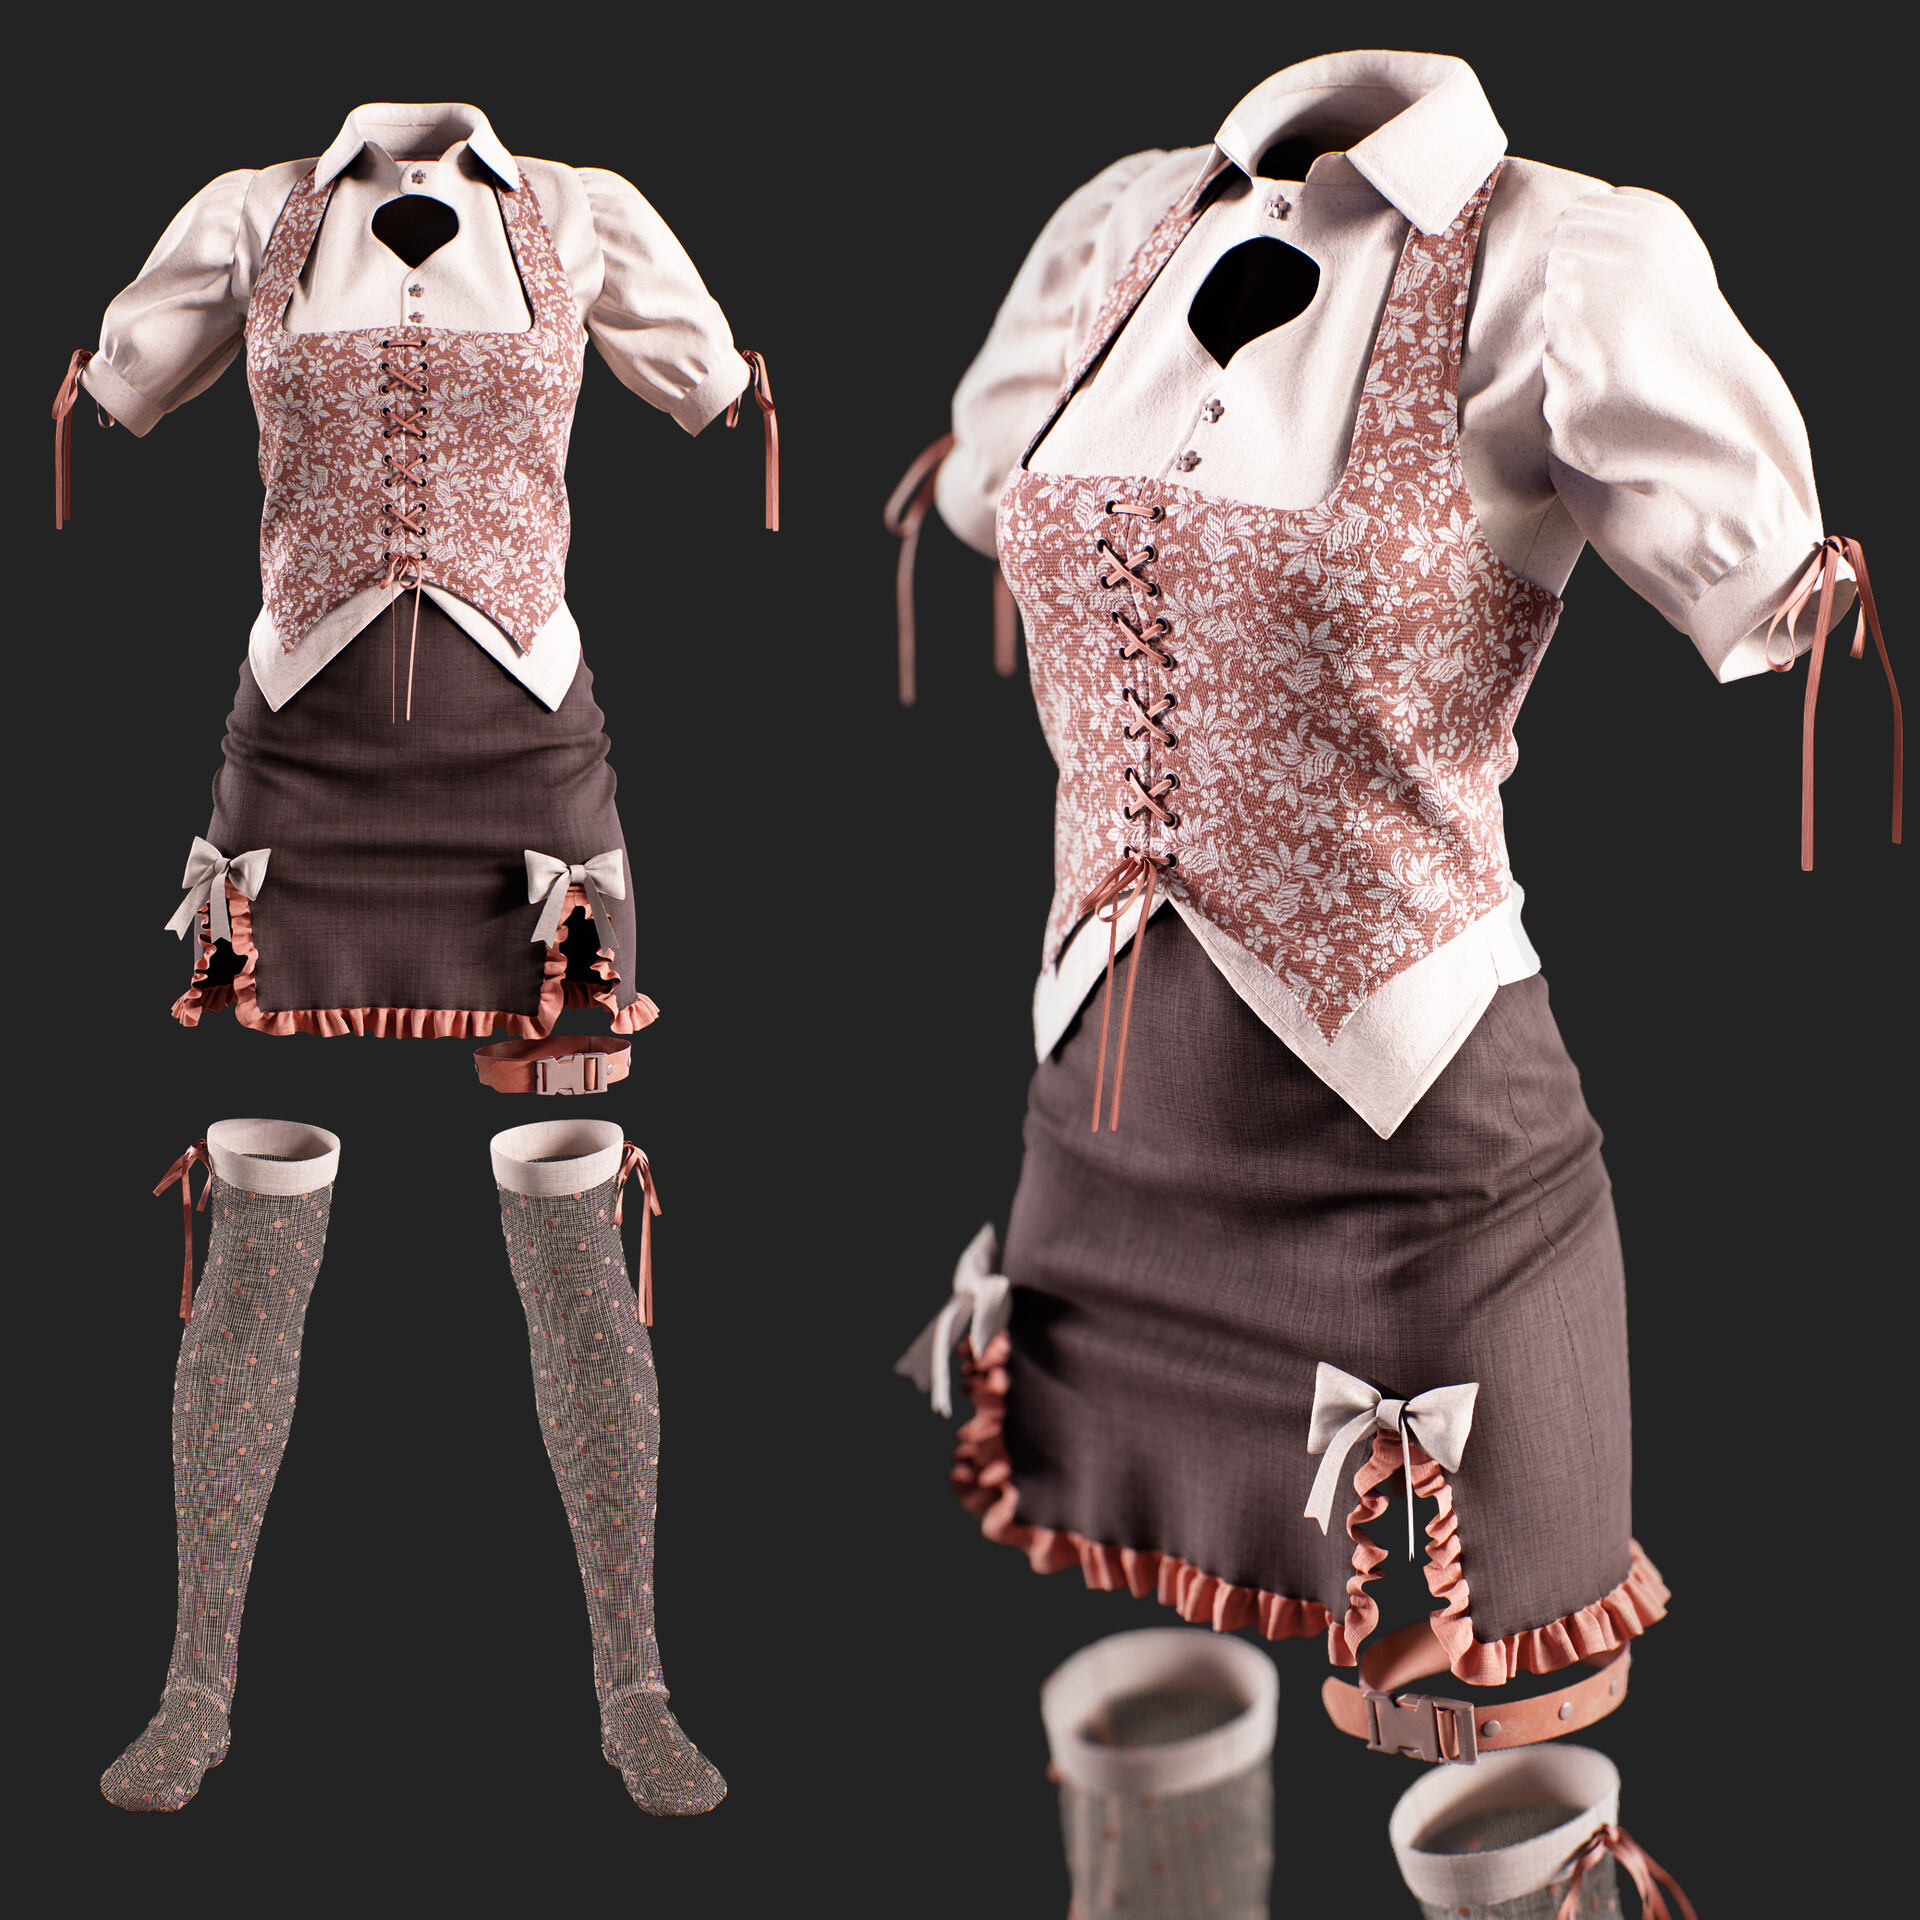 ArtStation - Girl's Outfit- MD/Clo3d + Smart Material + 4K Textures ...